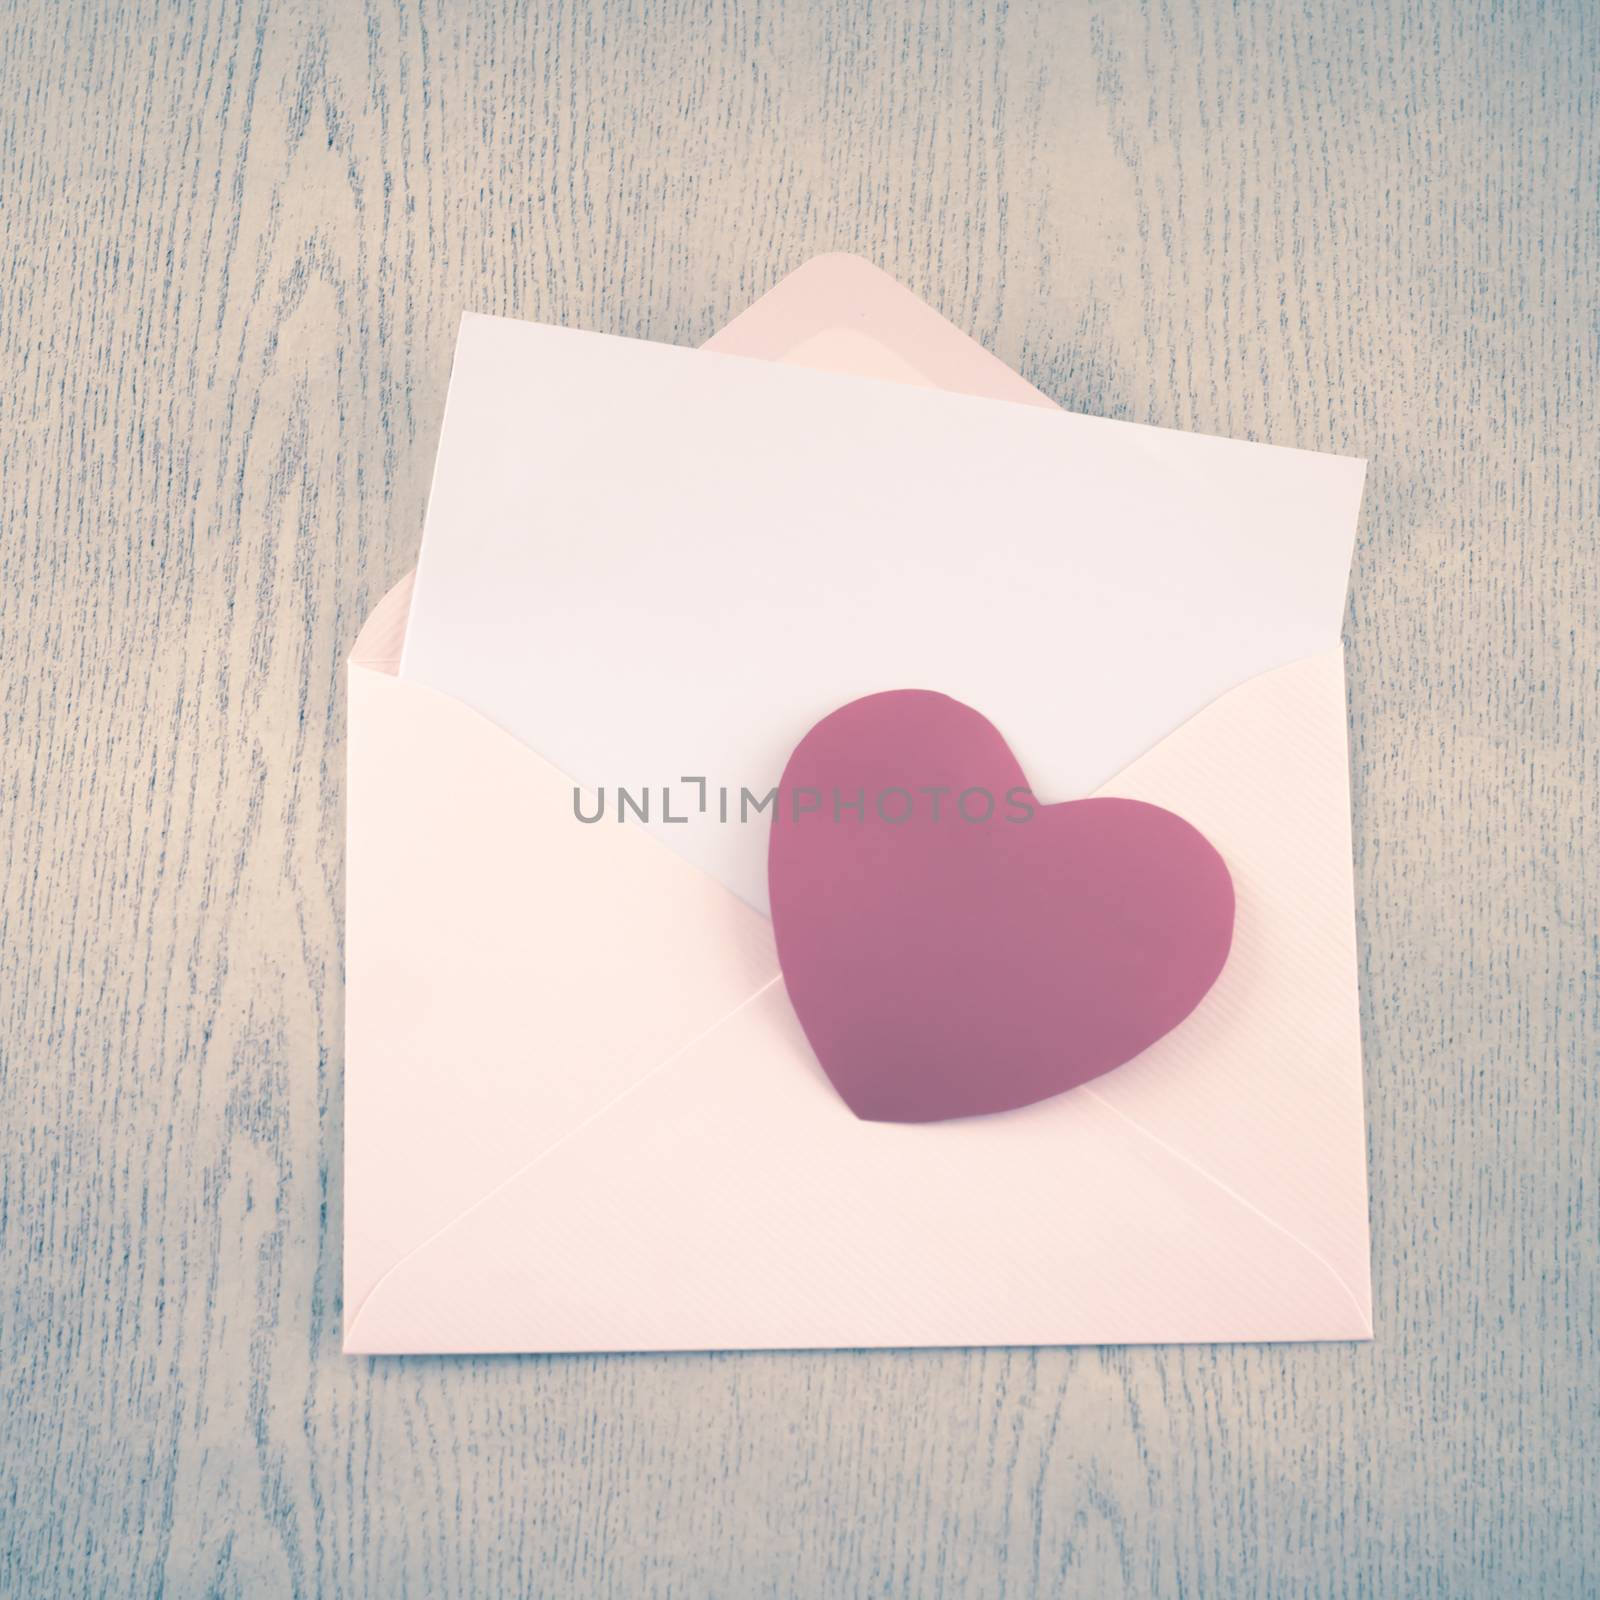 red heart with pink envelope on wooden background vintage style